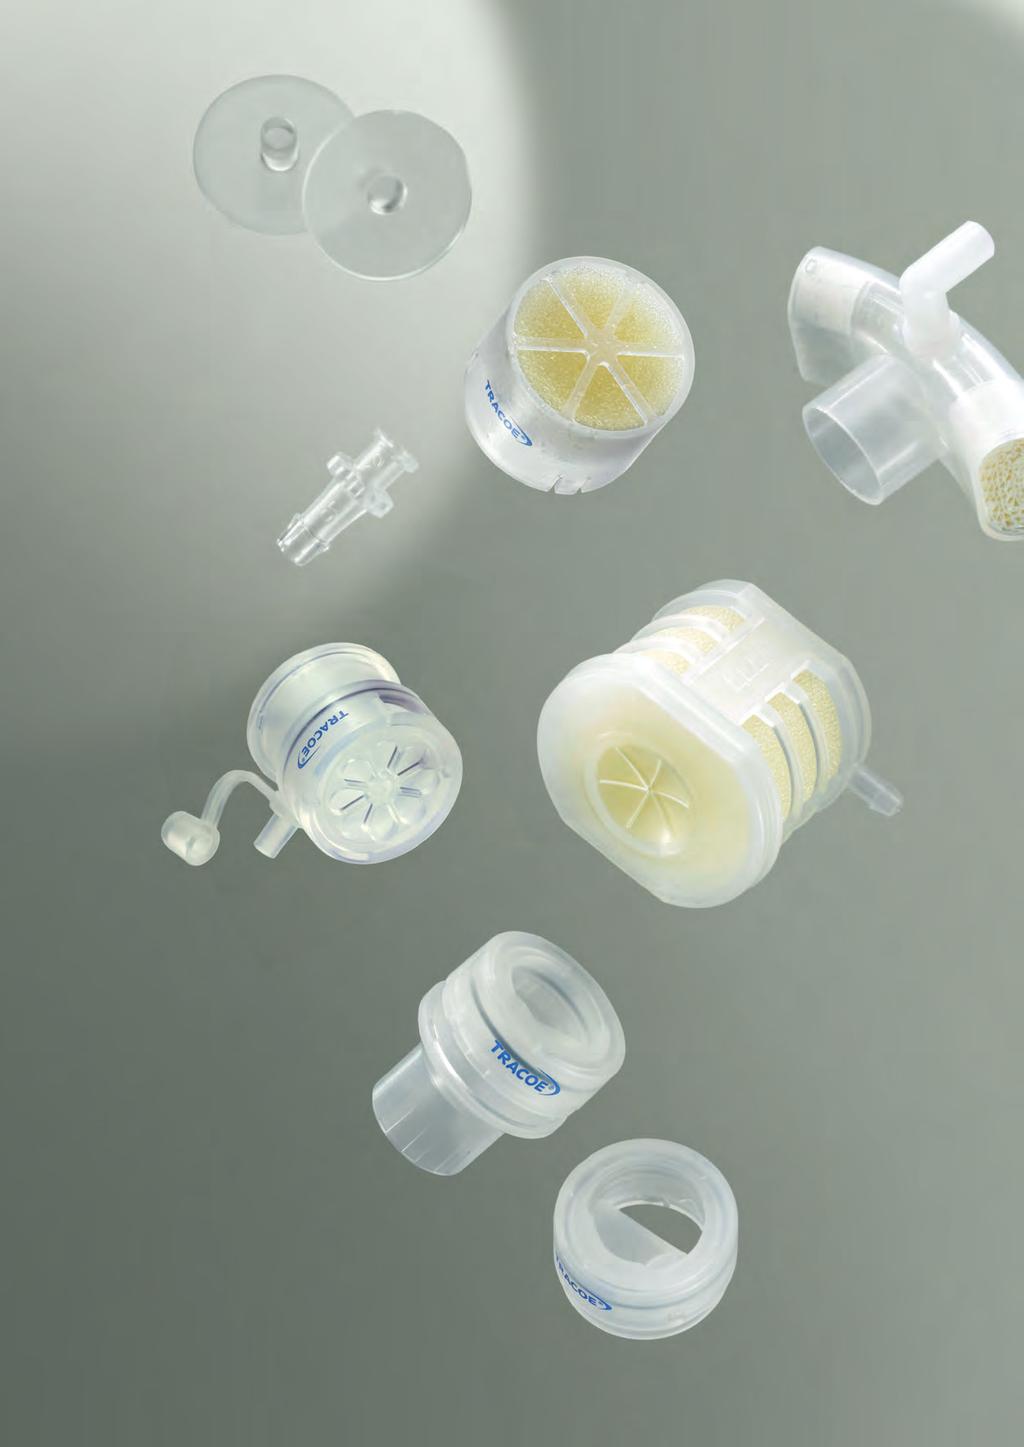 Flexibility Speaking valves, artificial noses and occlusion